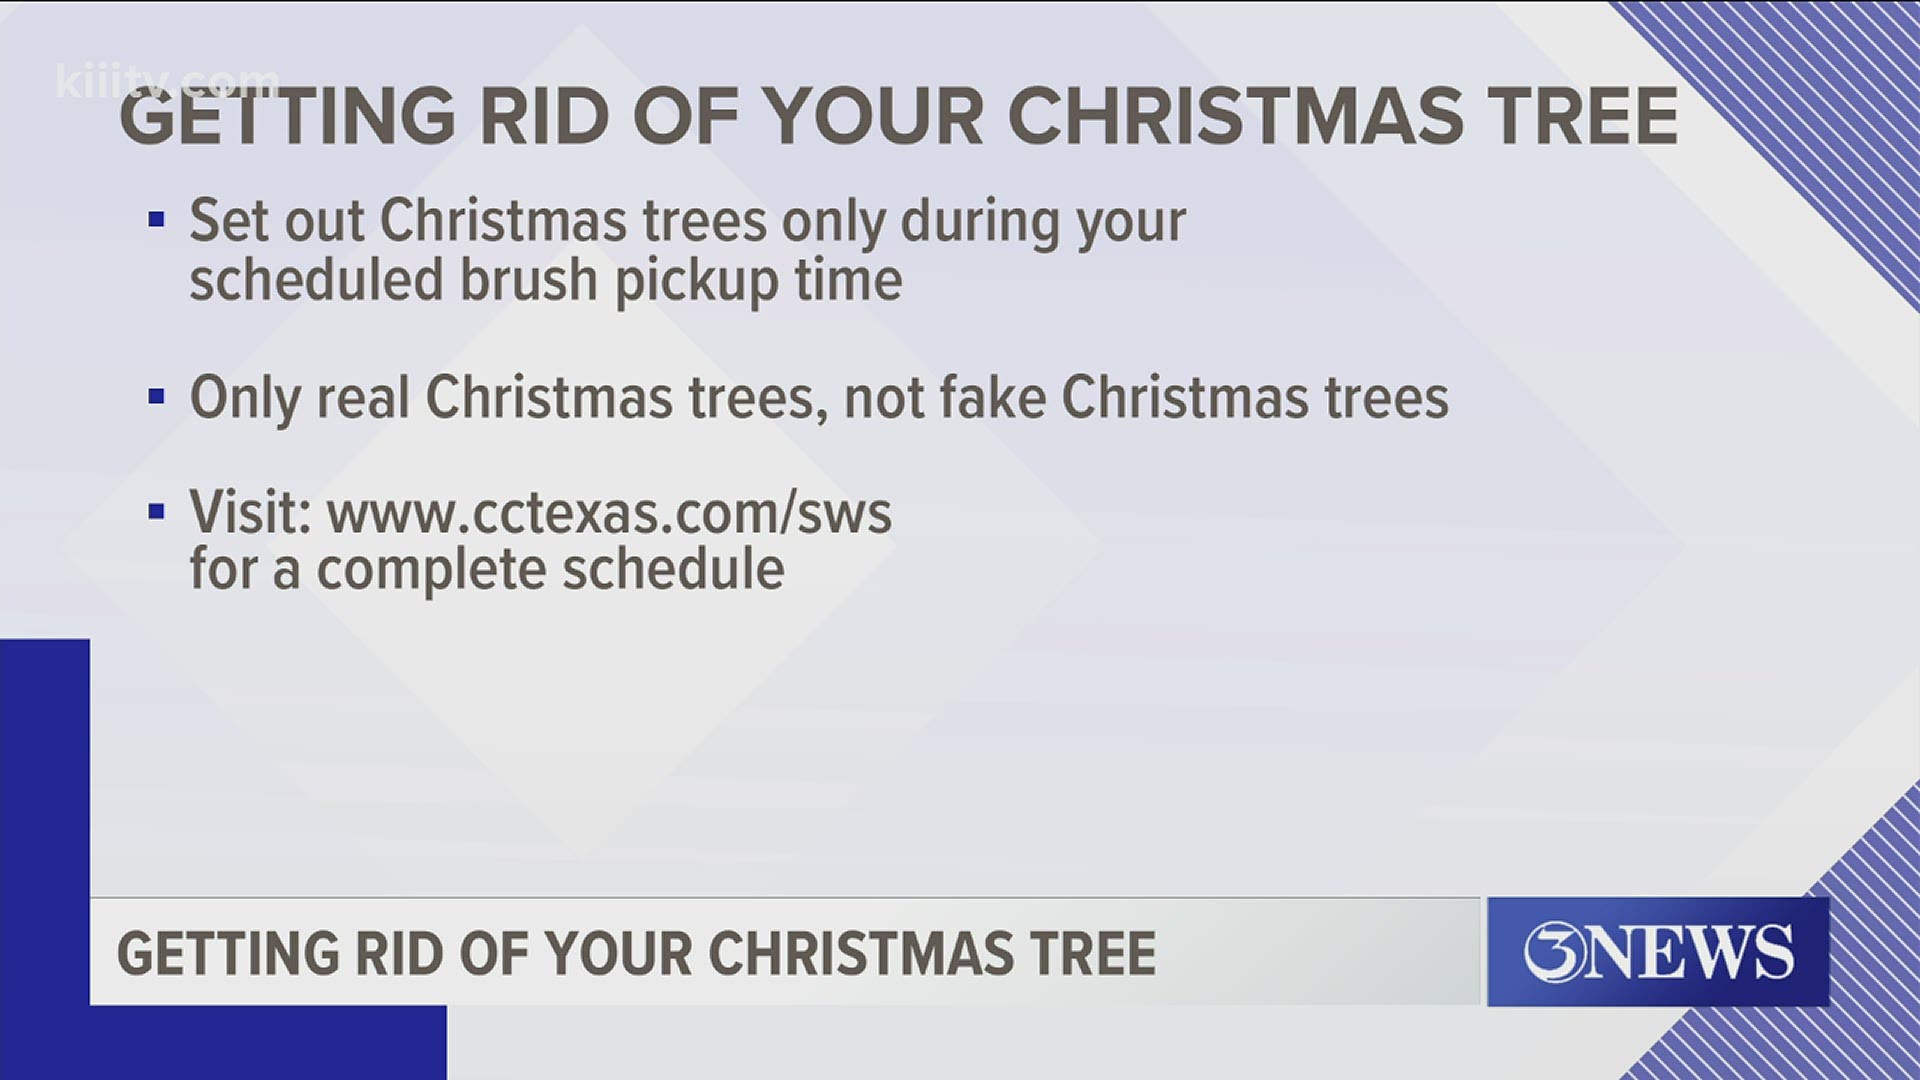 The city's solid waste department is asking folks to set out their Christmas trees only during your area's scheduled brush pickup times.